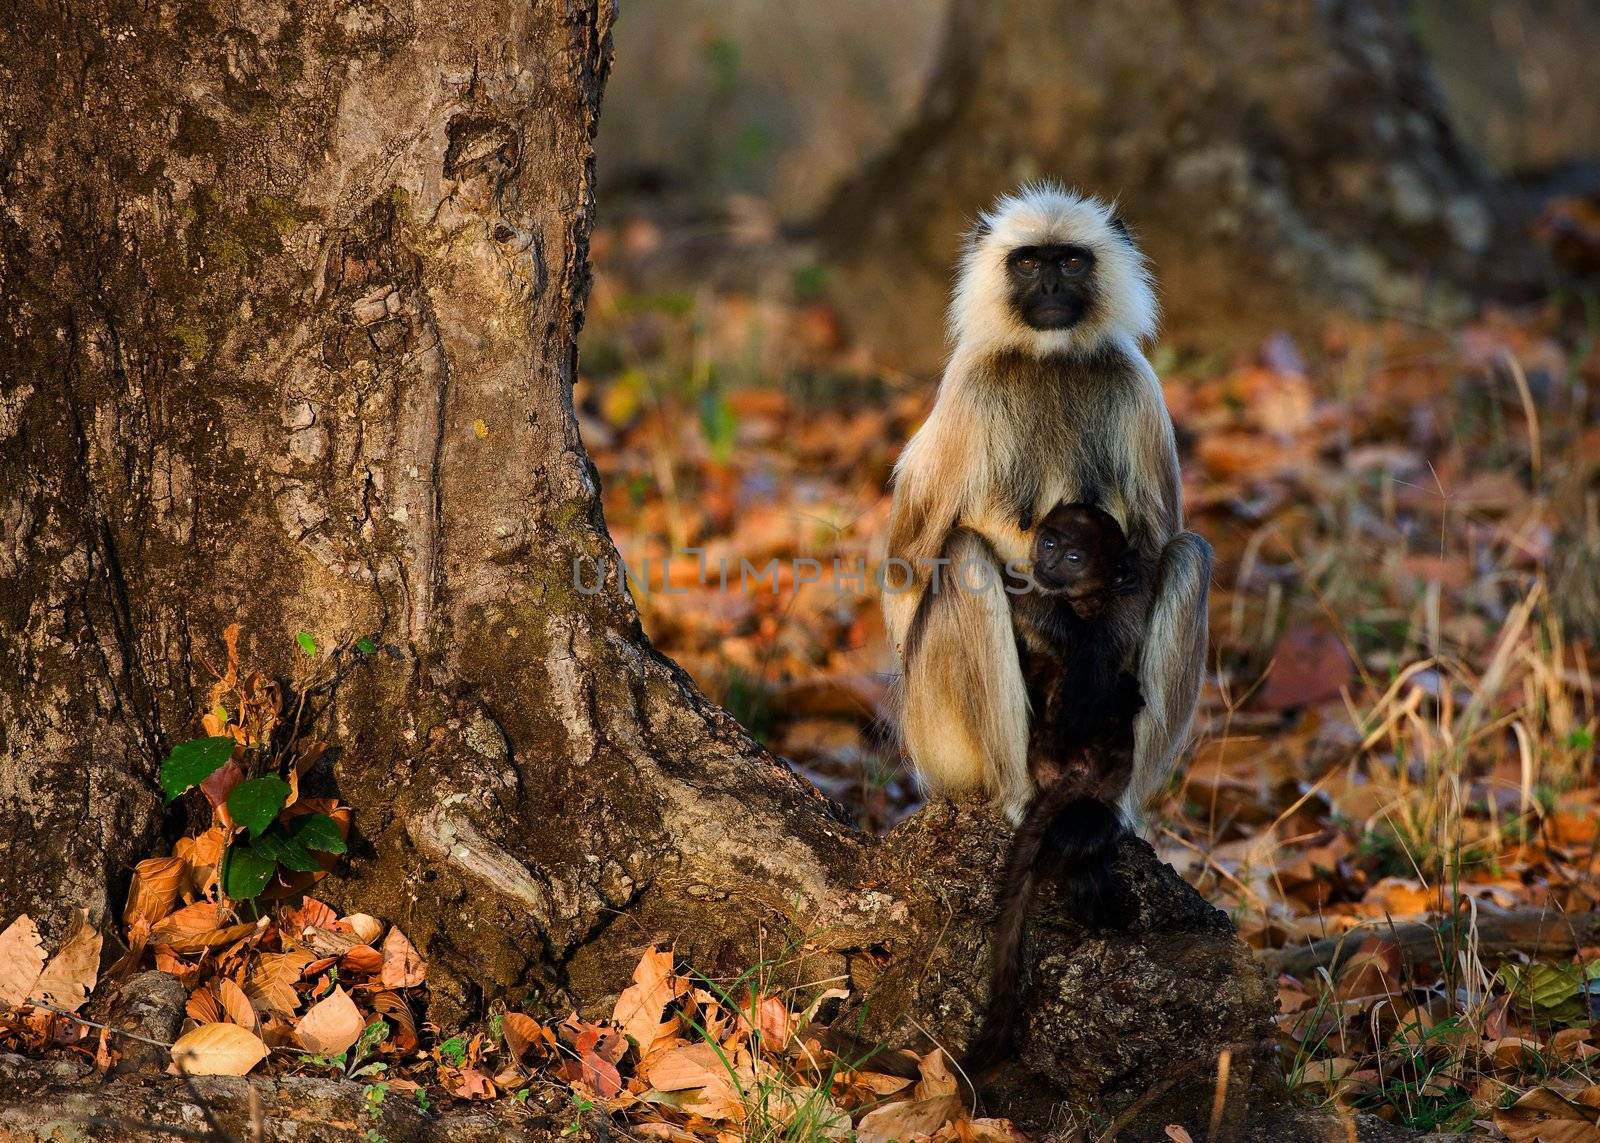 Langur with a cub sits on a tree root in sunset light.